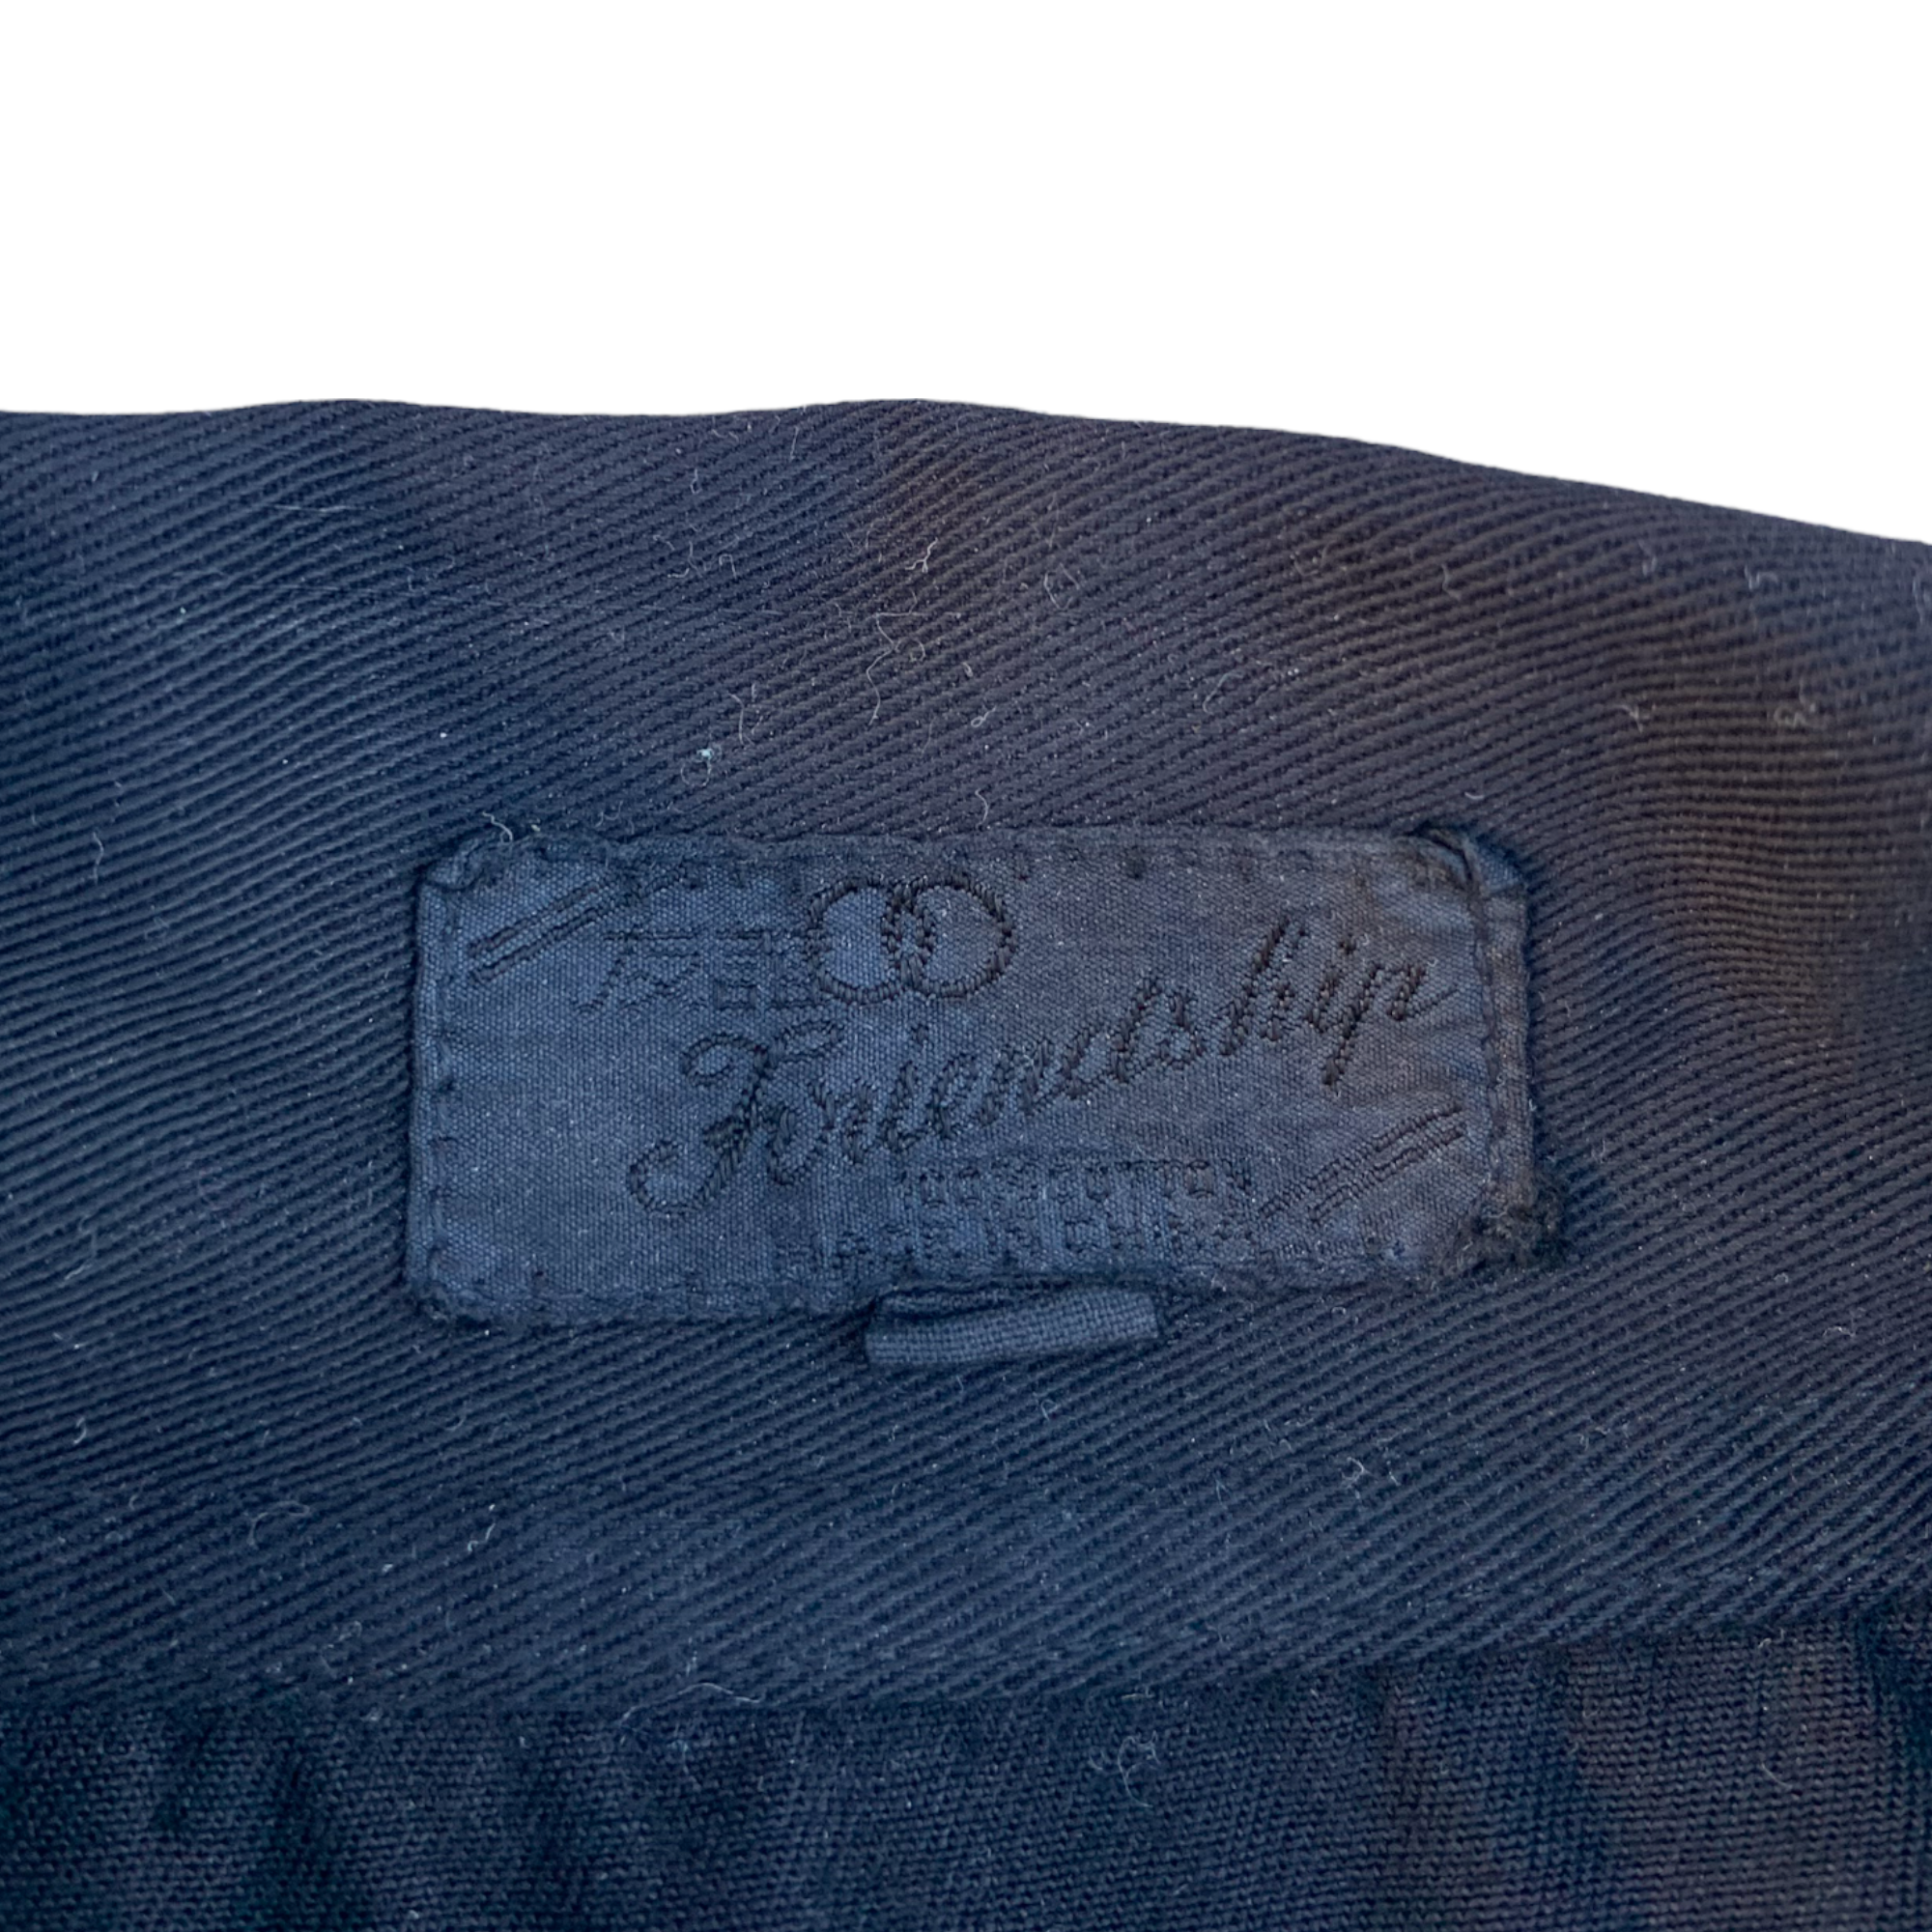 1970s ‘Friendship’ Brand Dyed Chinese Work Jacket - Black - S